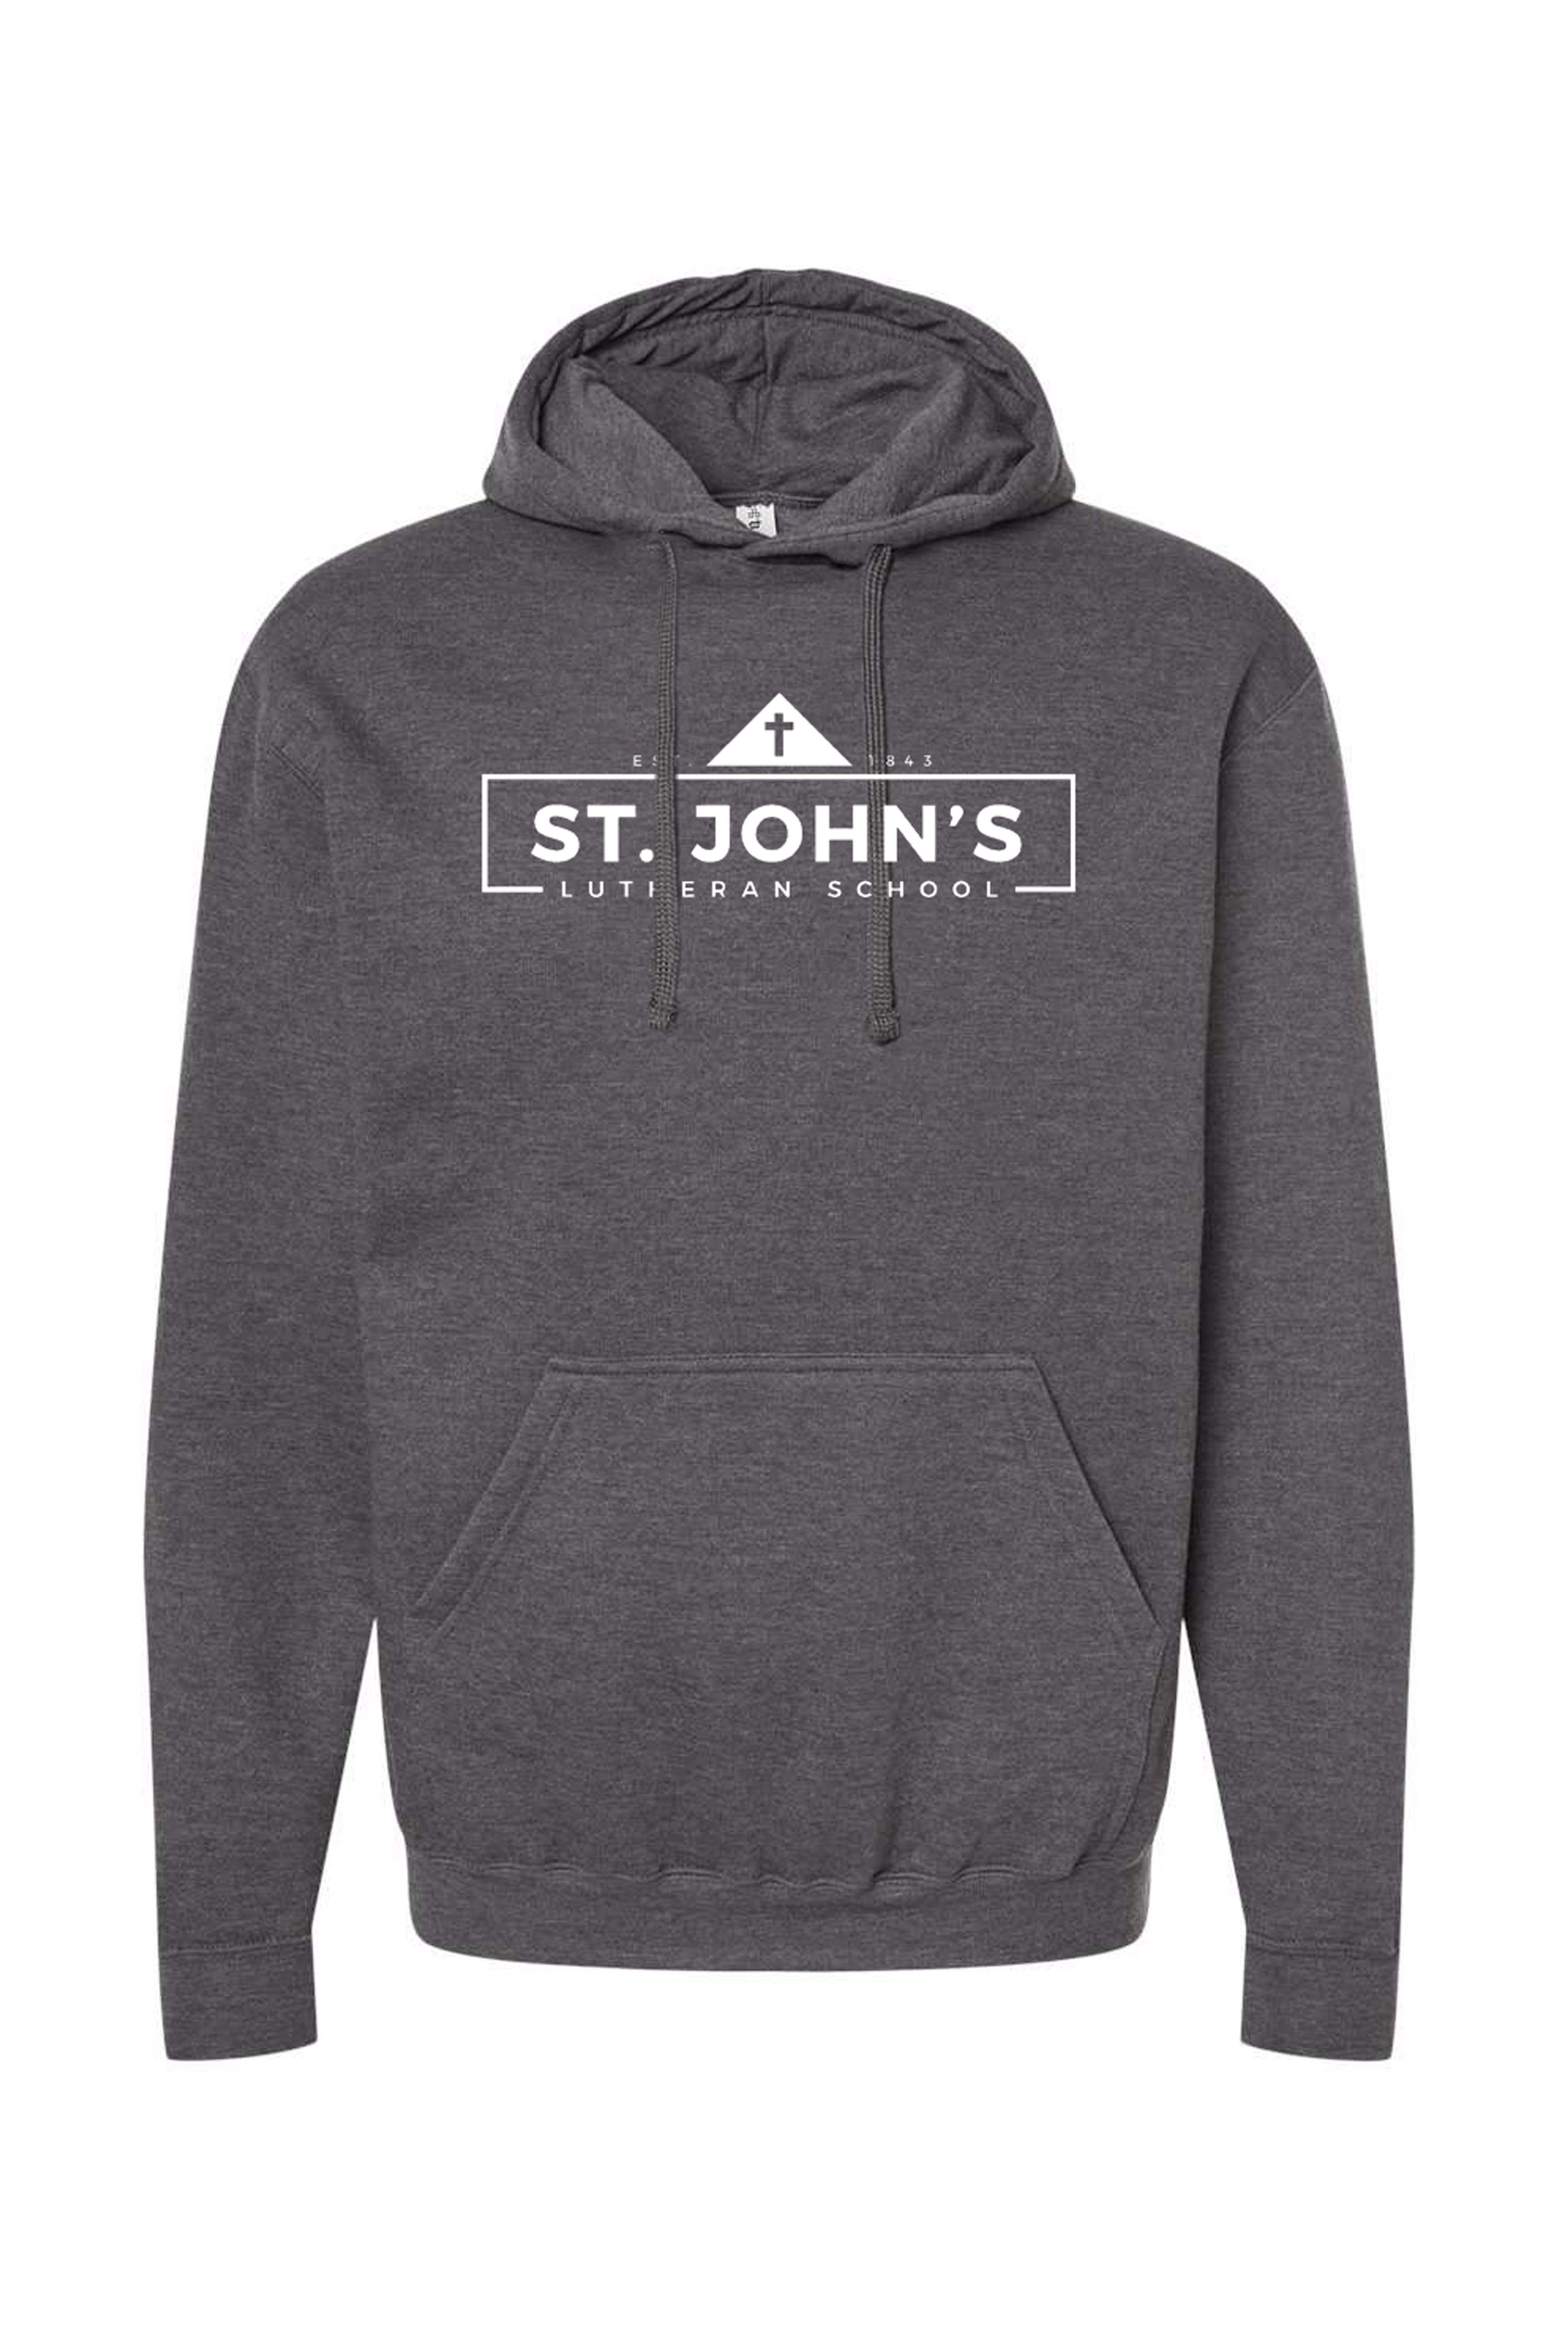 St Johns Midweight Hoodie